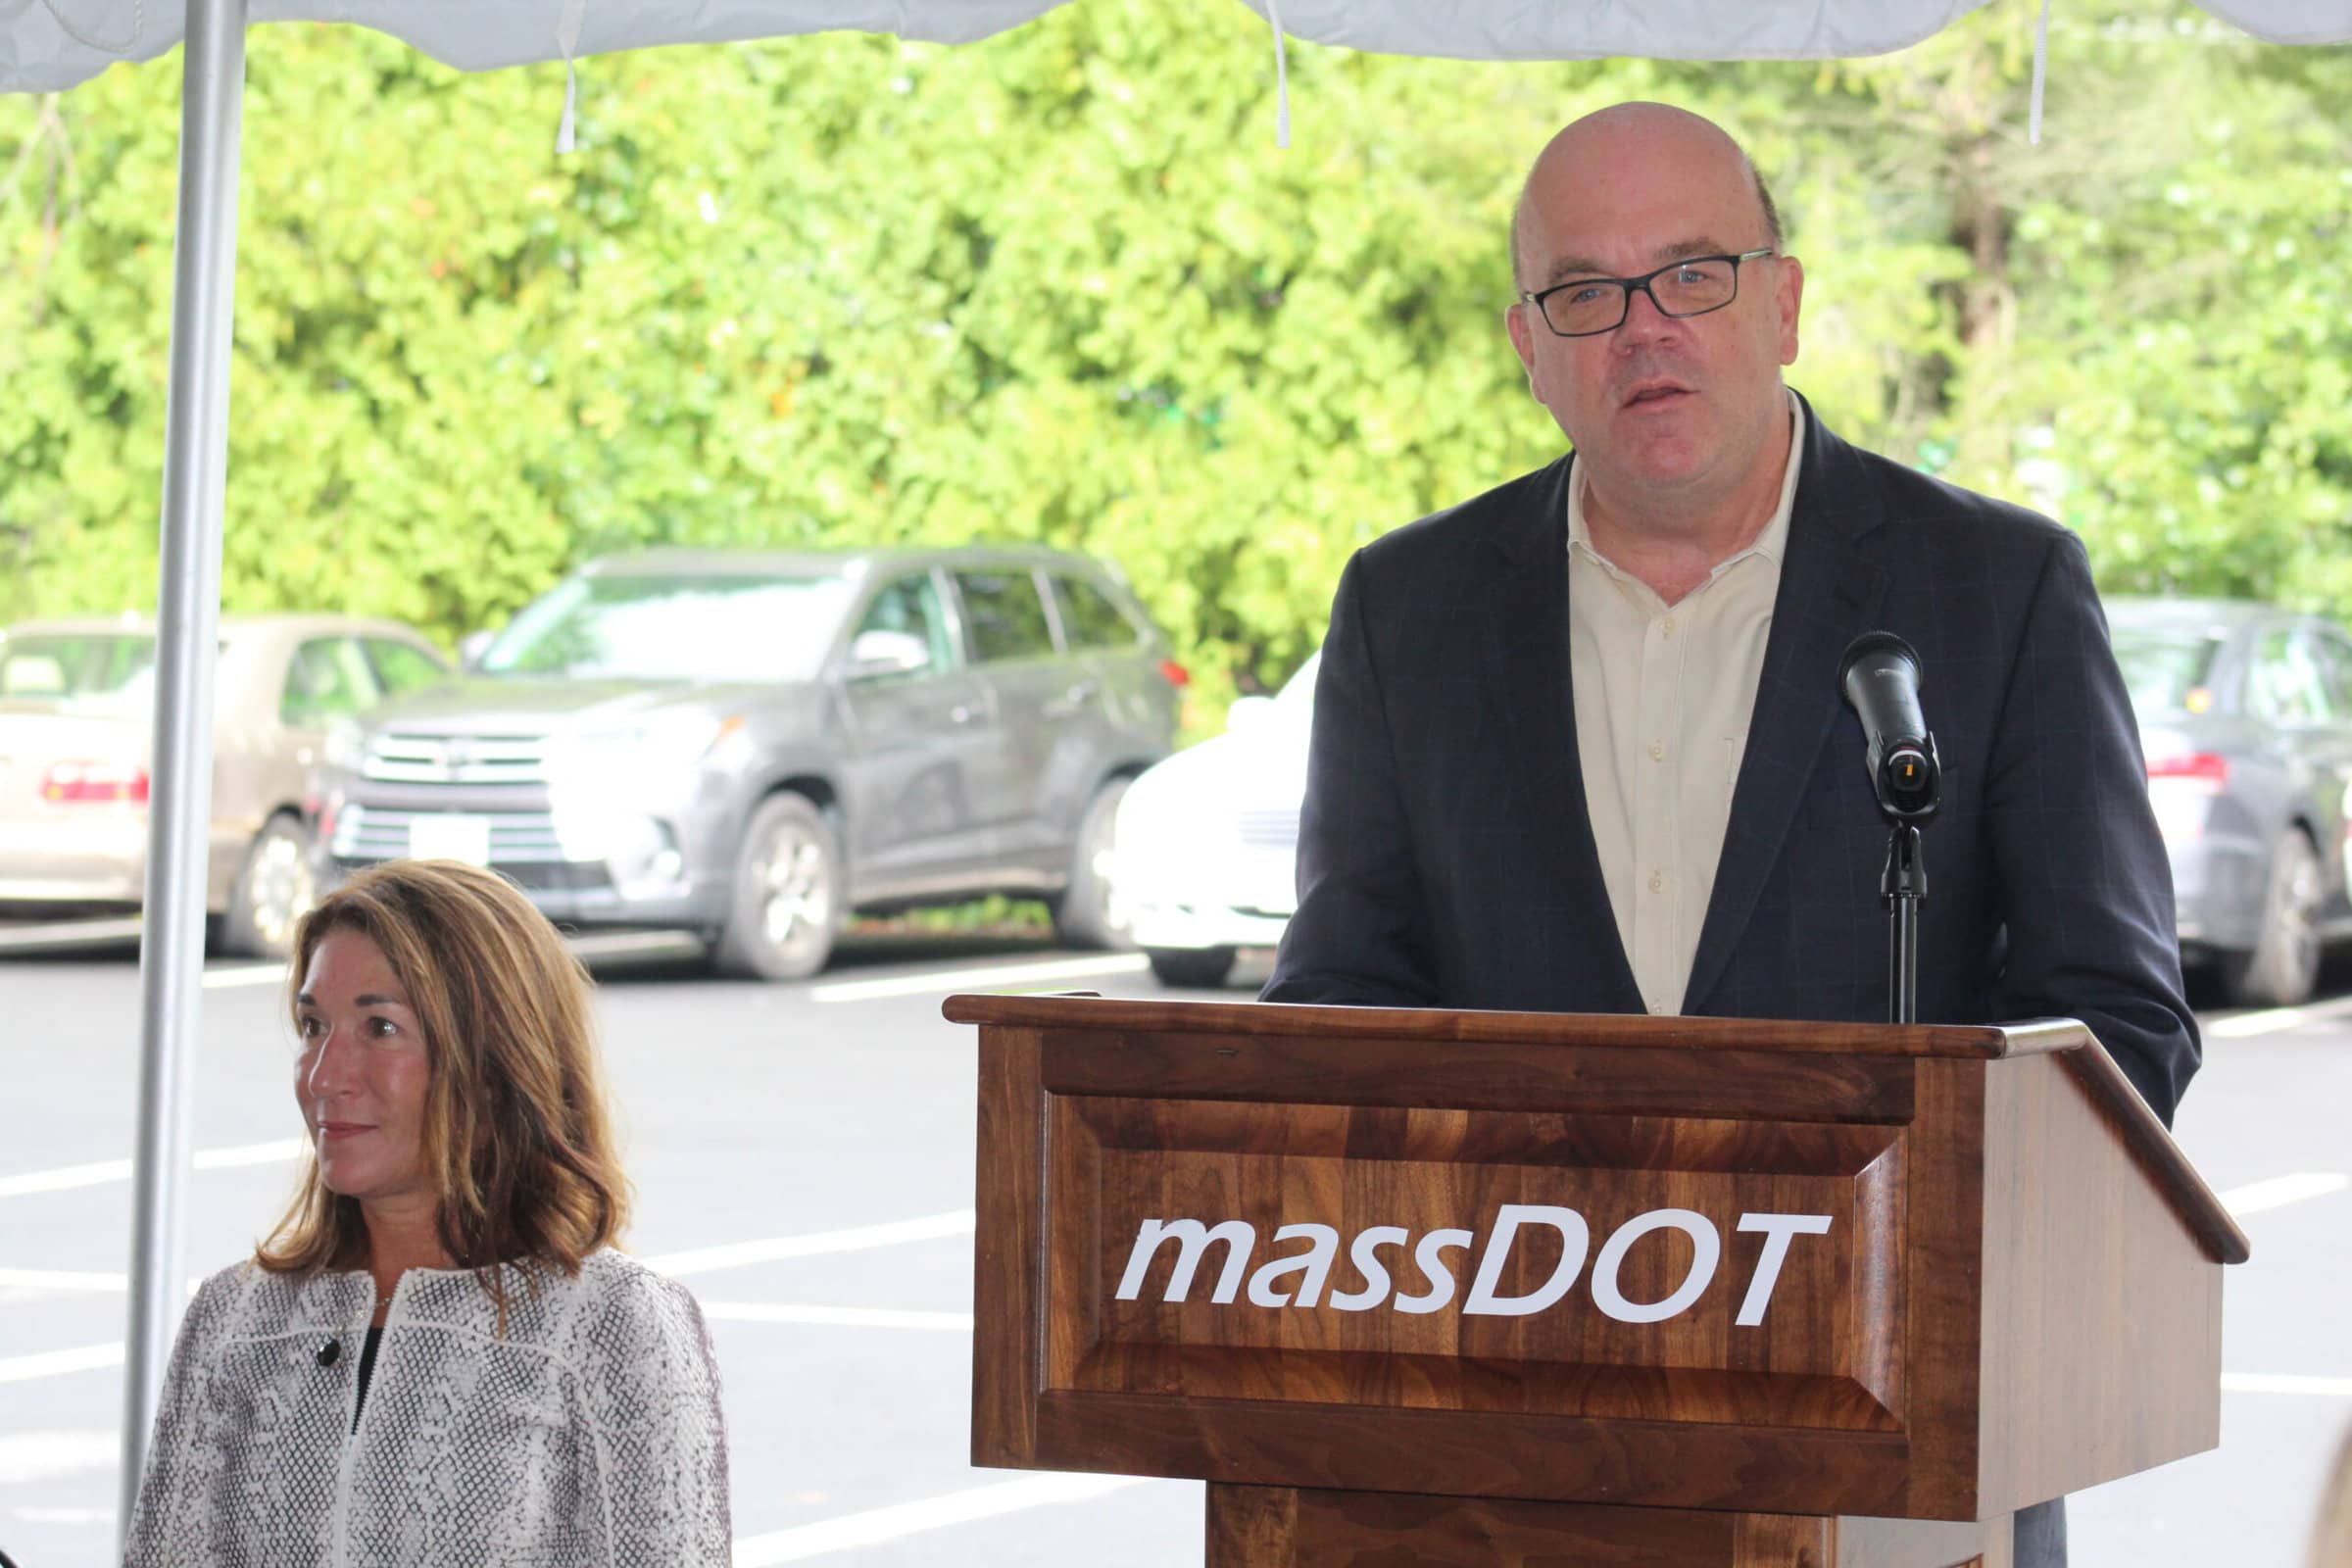 Rt. 20 improvements coming to Shrewsbury: ‘It pays to be brave’